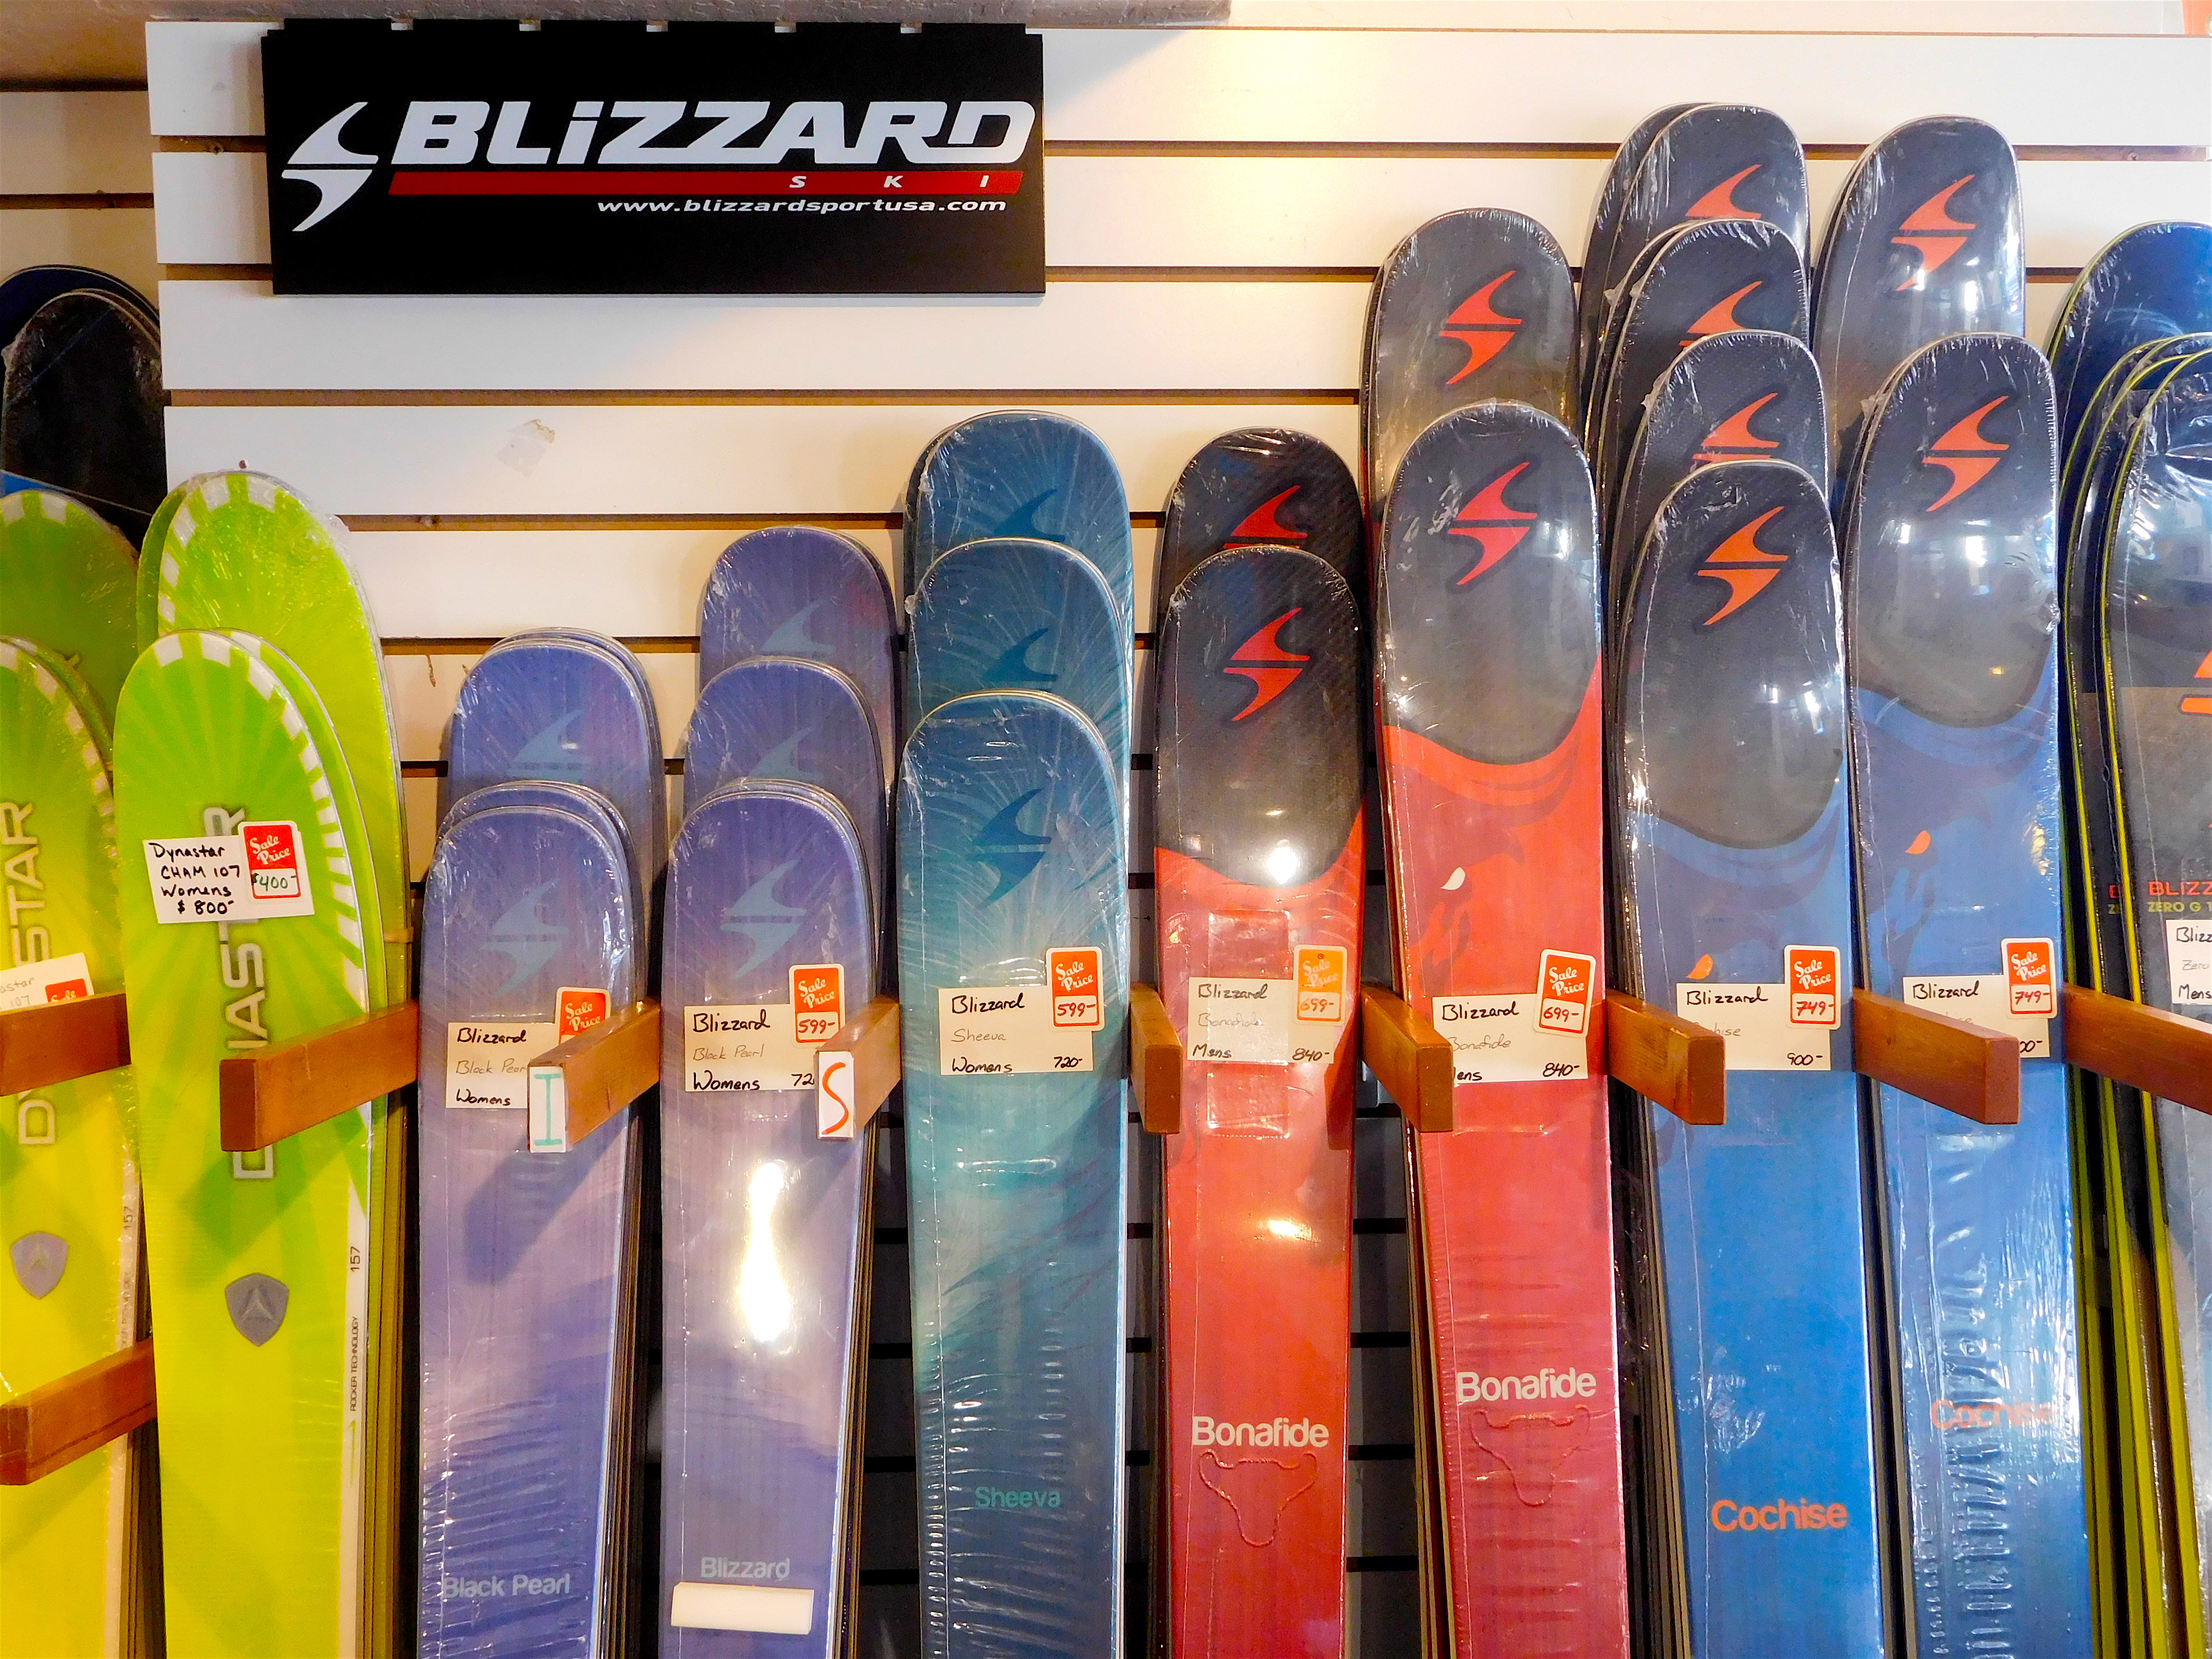 Blizzard skis for sale at Olympic.